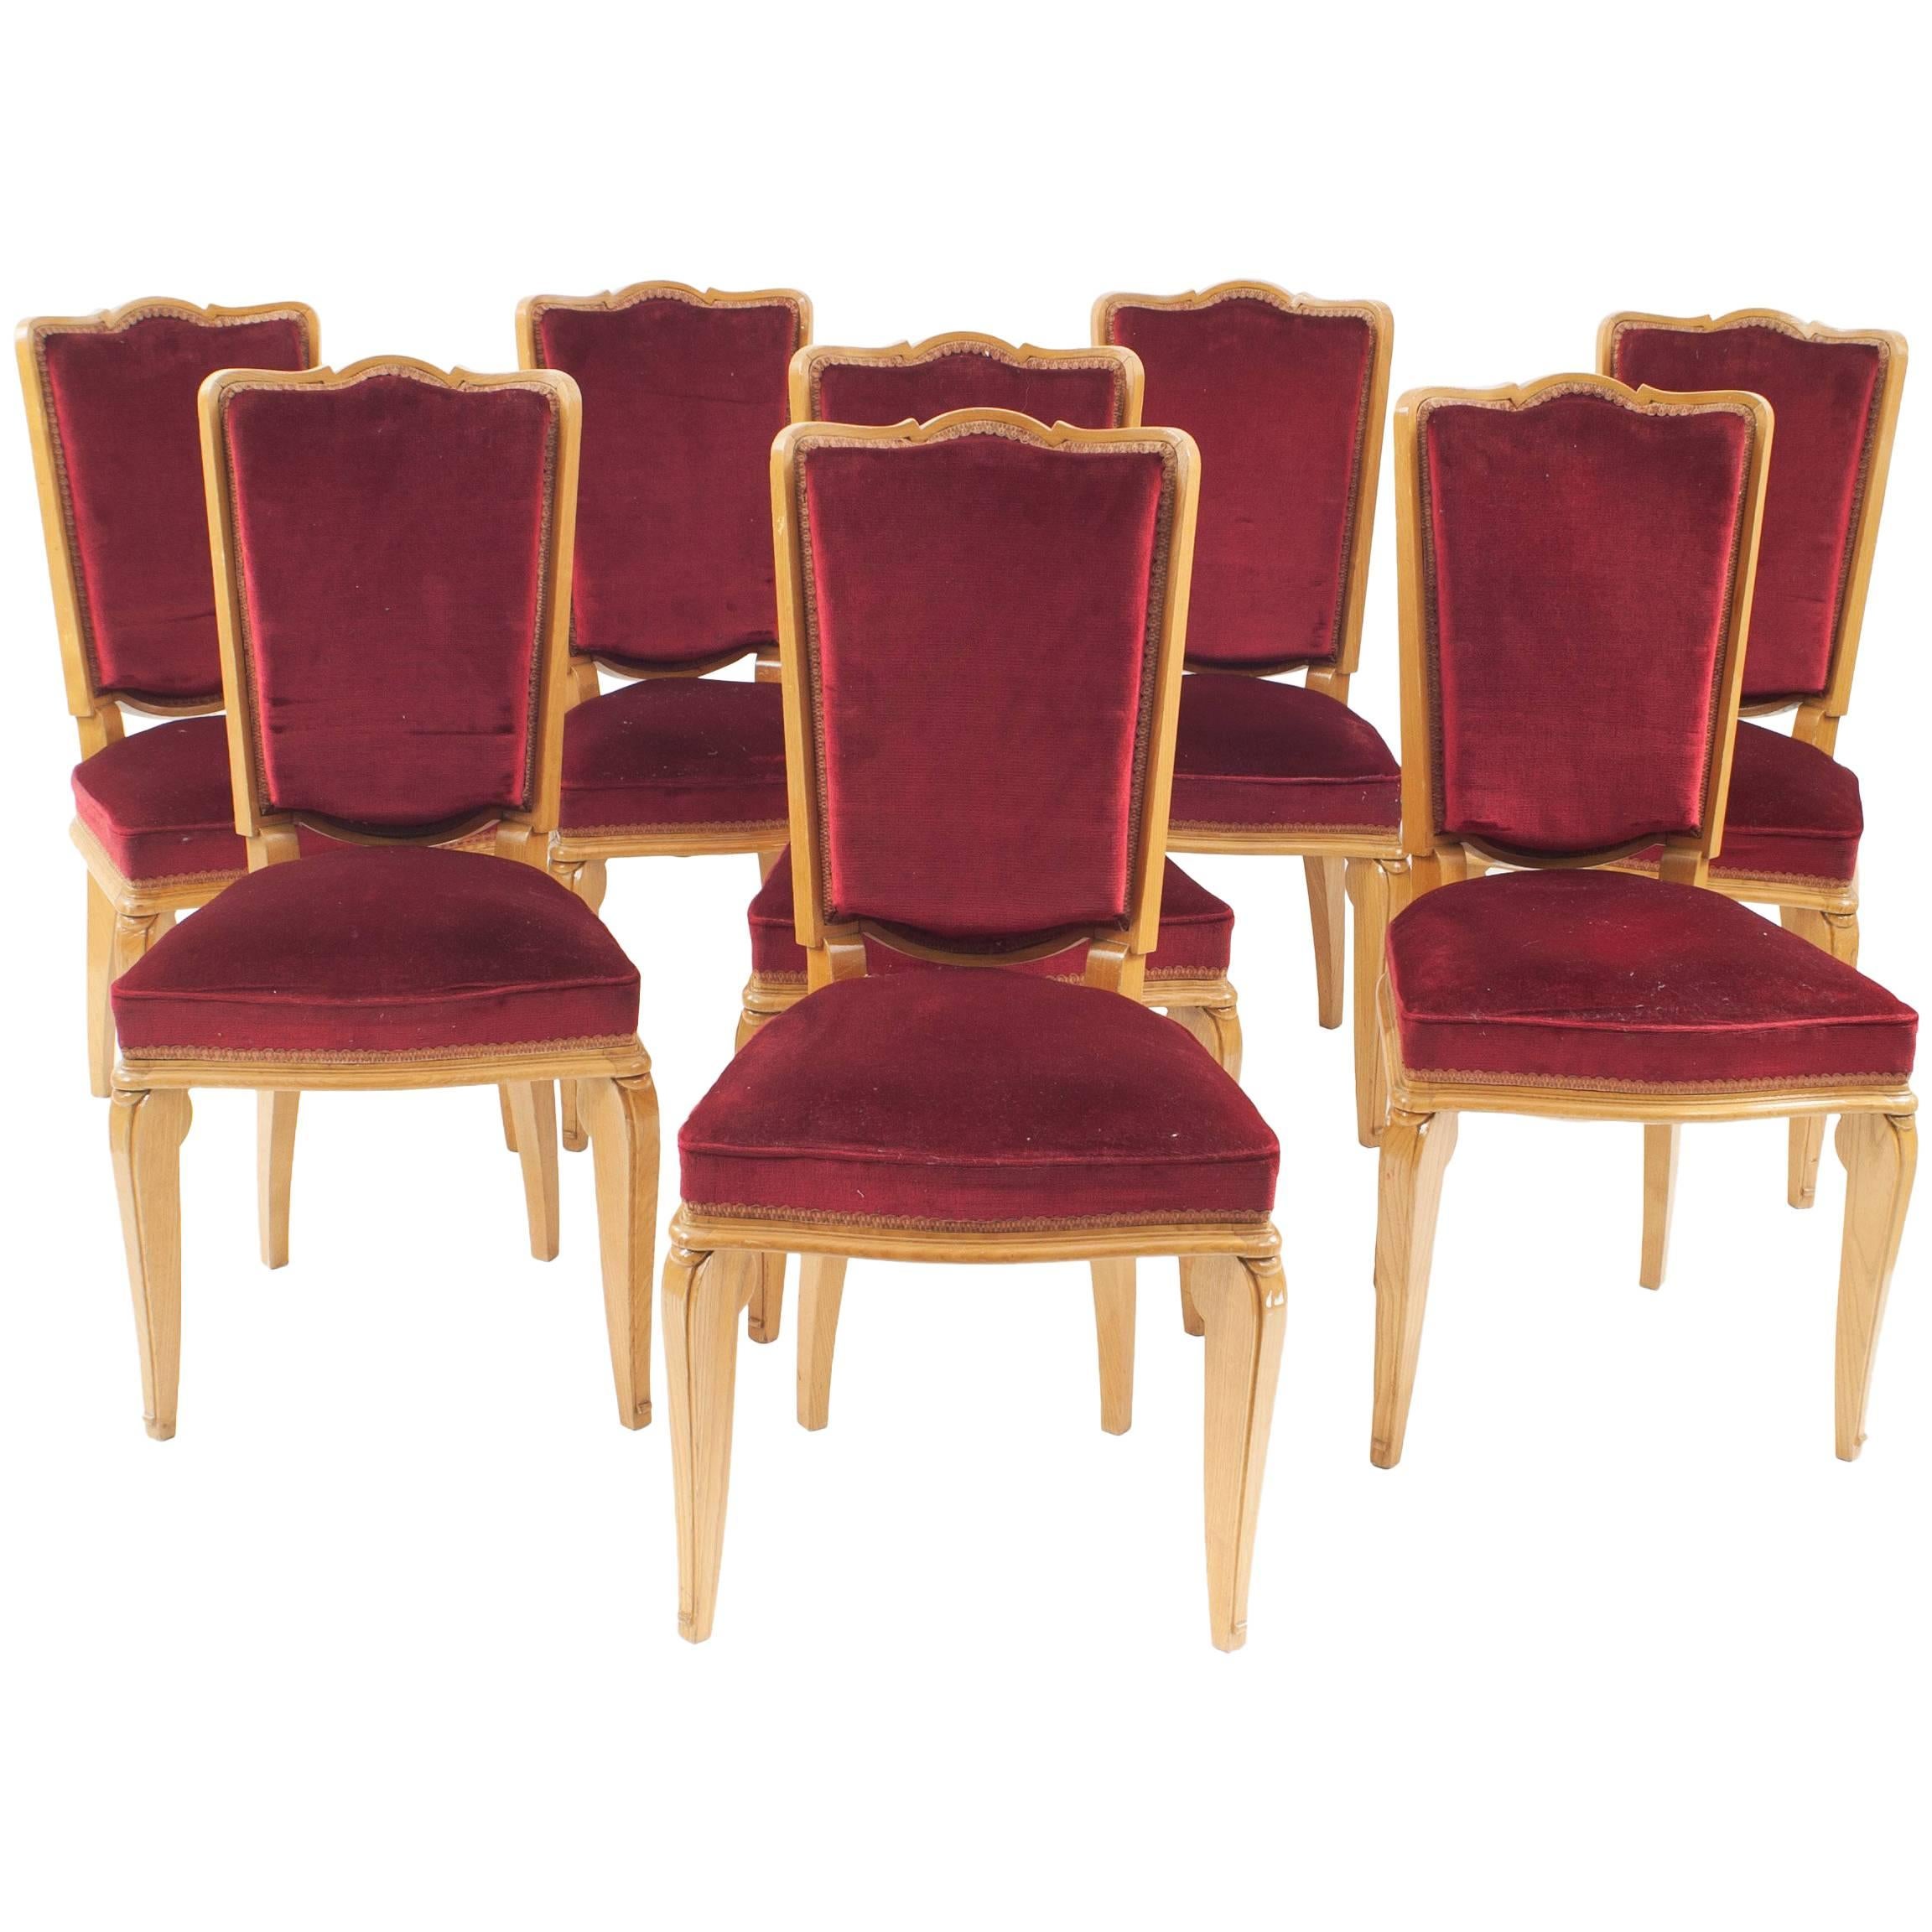 Set of Eight French '1938' Sycamore Side Chairs, Attributed to André Arbus